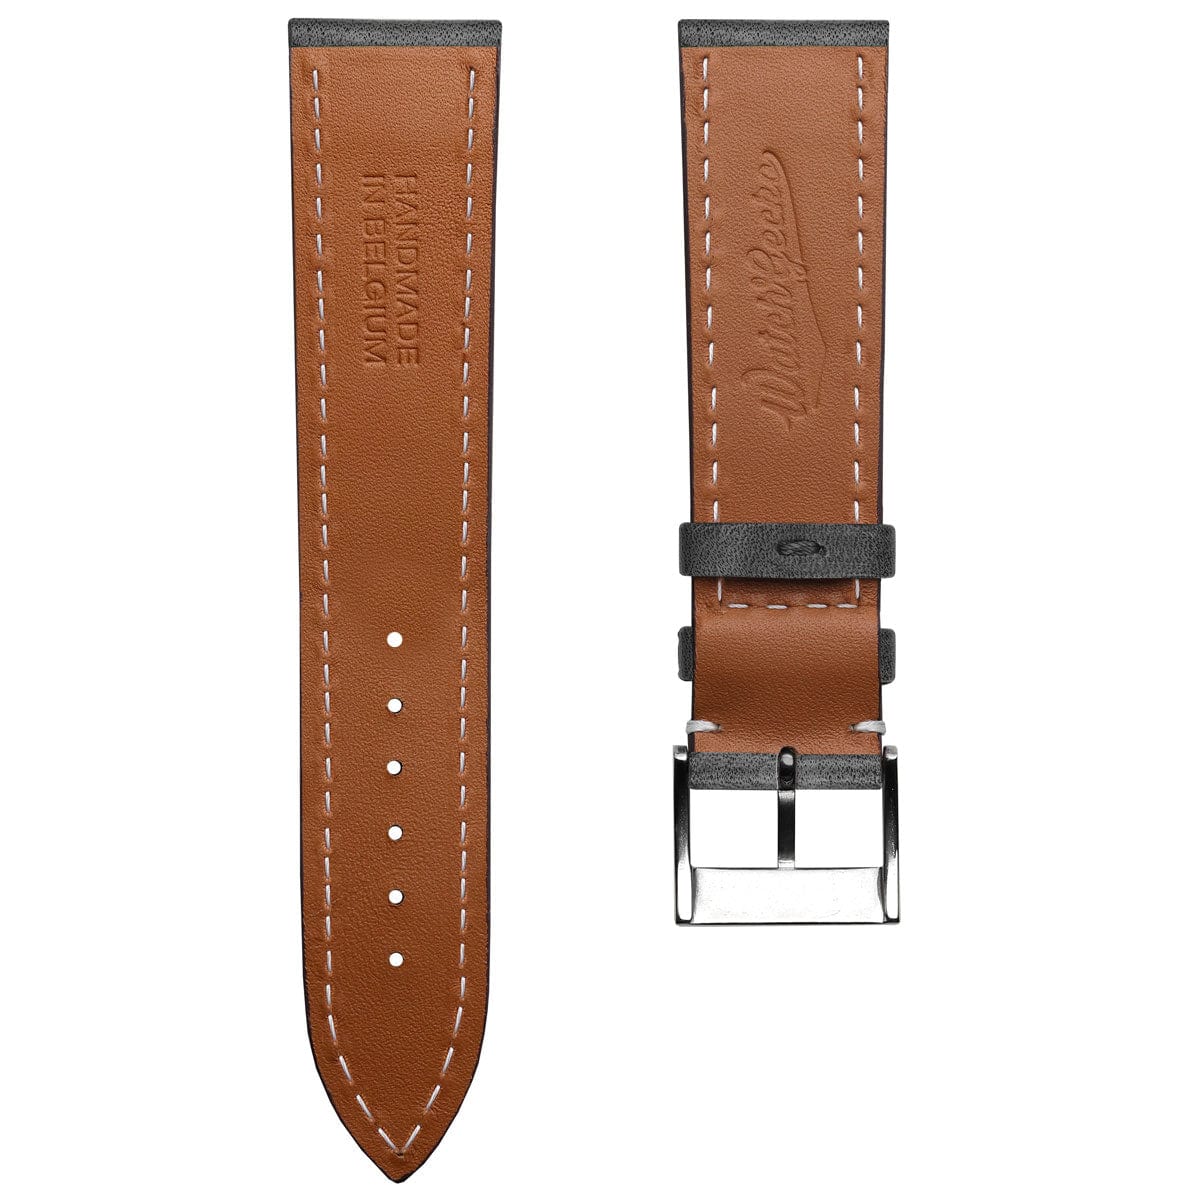 Ostend Thick Padded Leather Watch Strap - Patina Blue Jeans